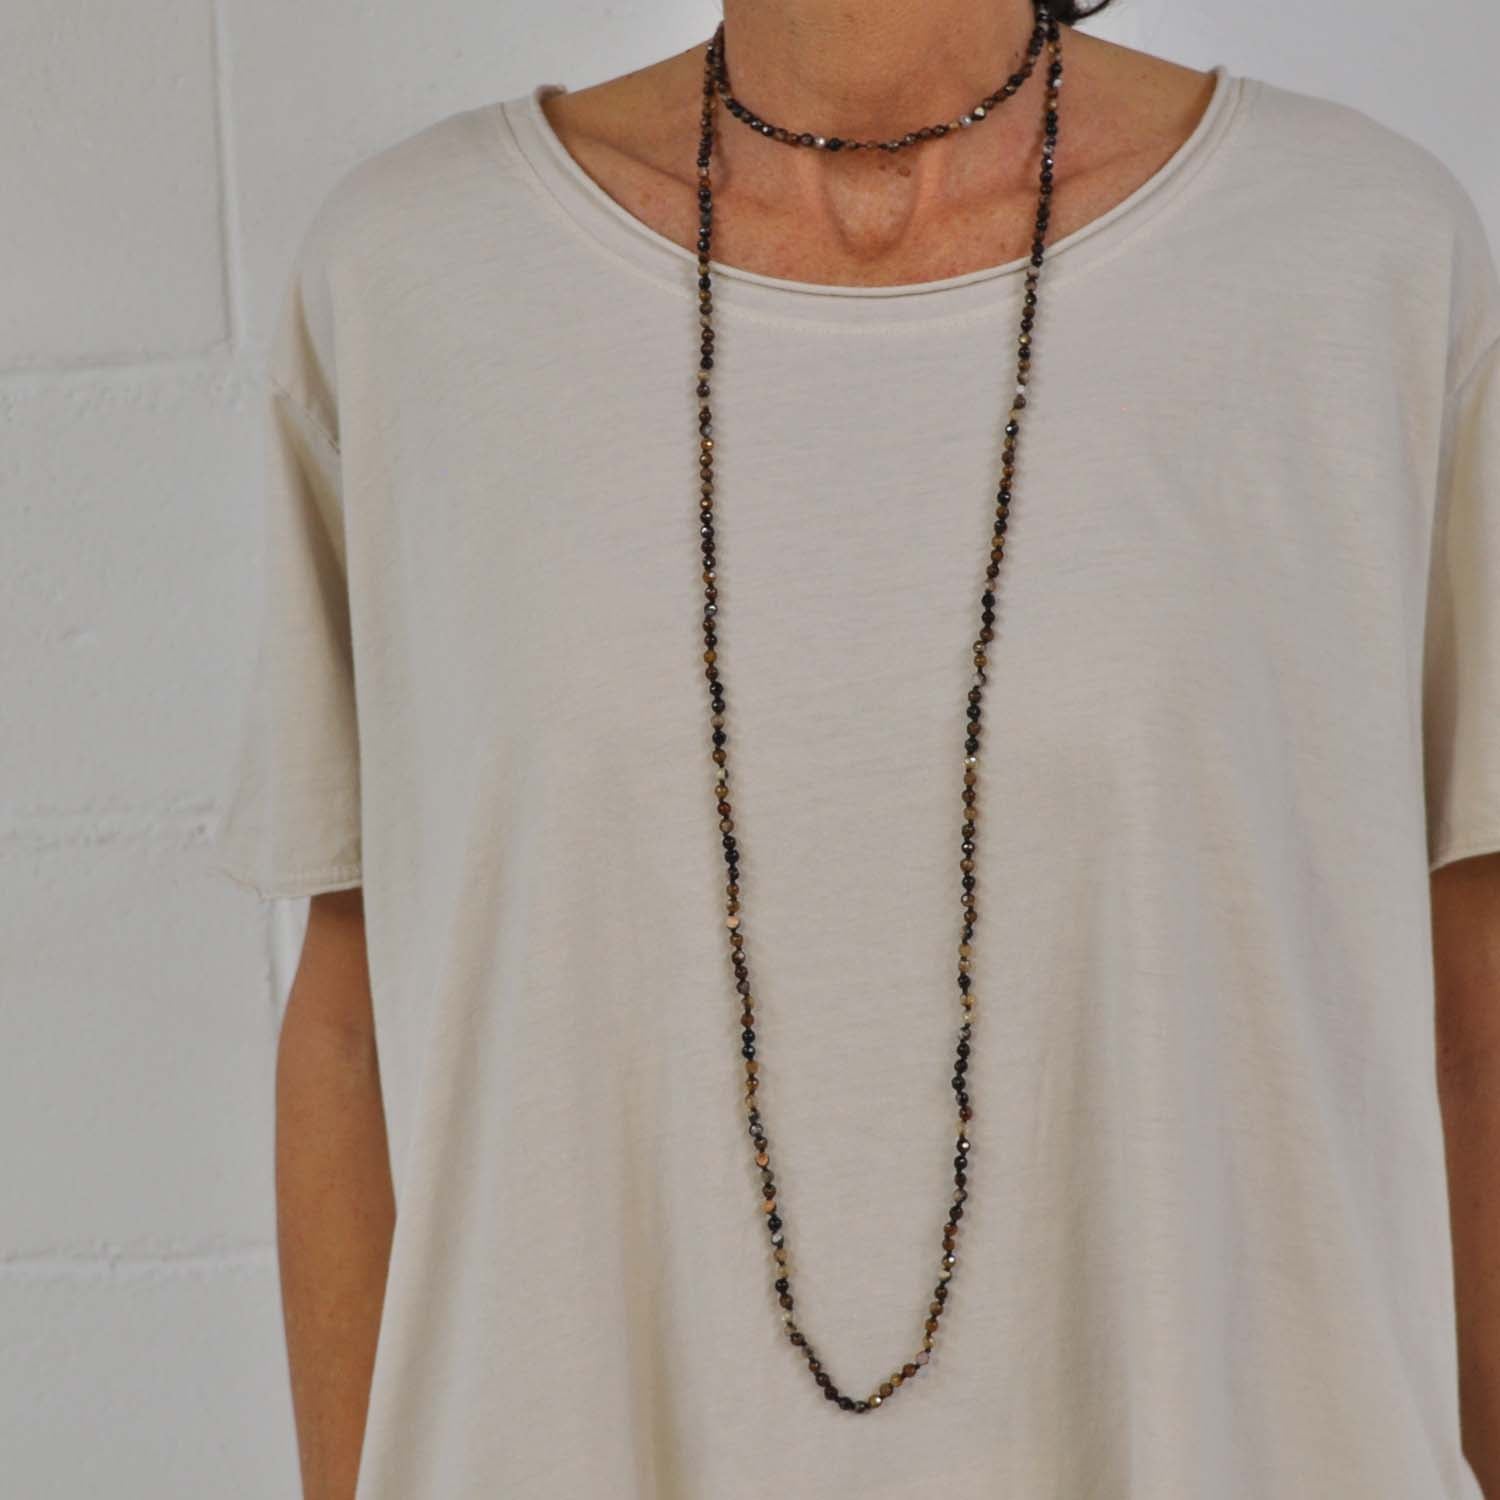 Brown crystal beads necklace